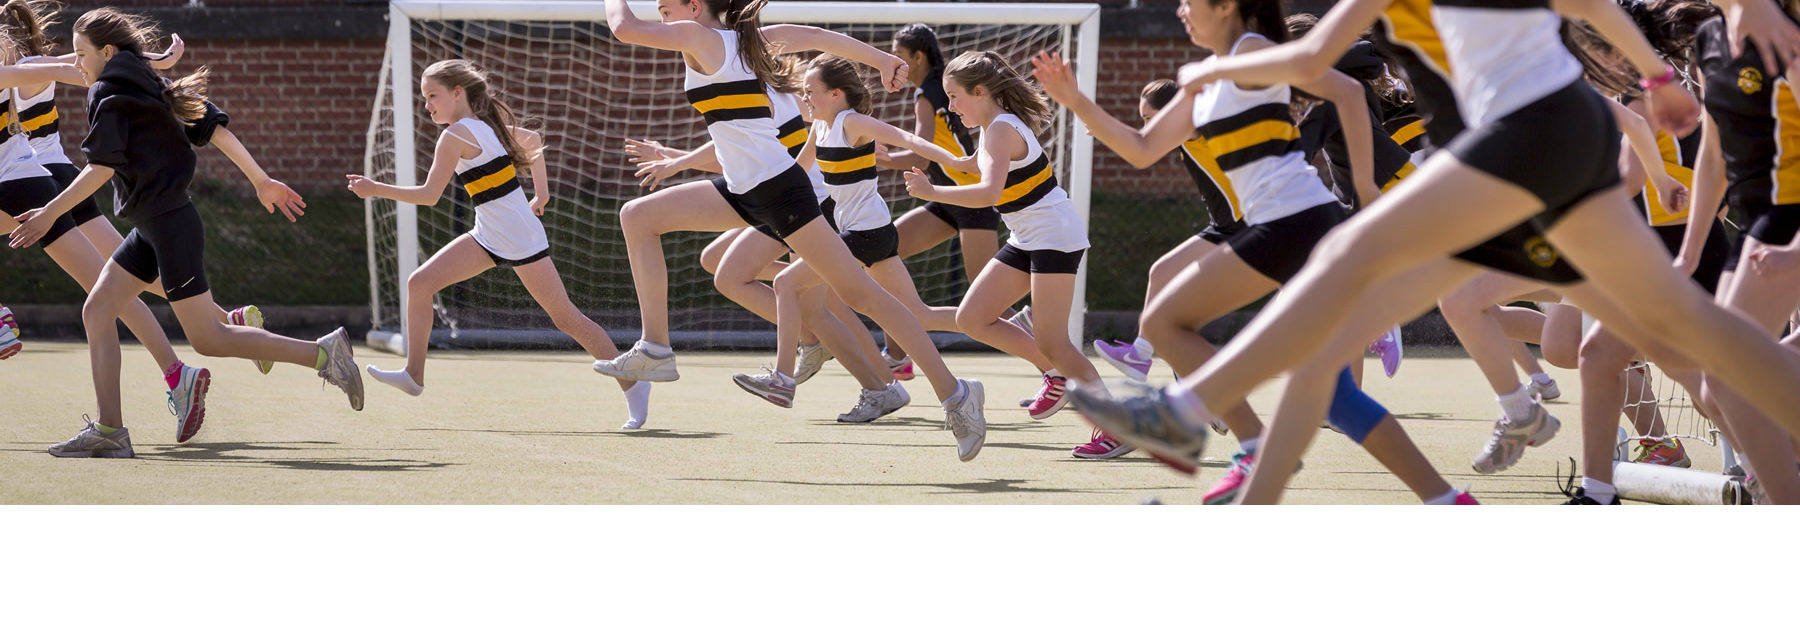 Caterham Girls Selected for Surrey and Sussex Satellite Netball Academies